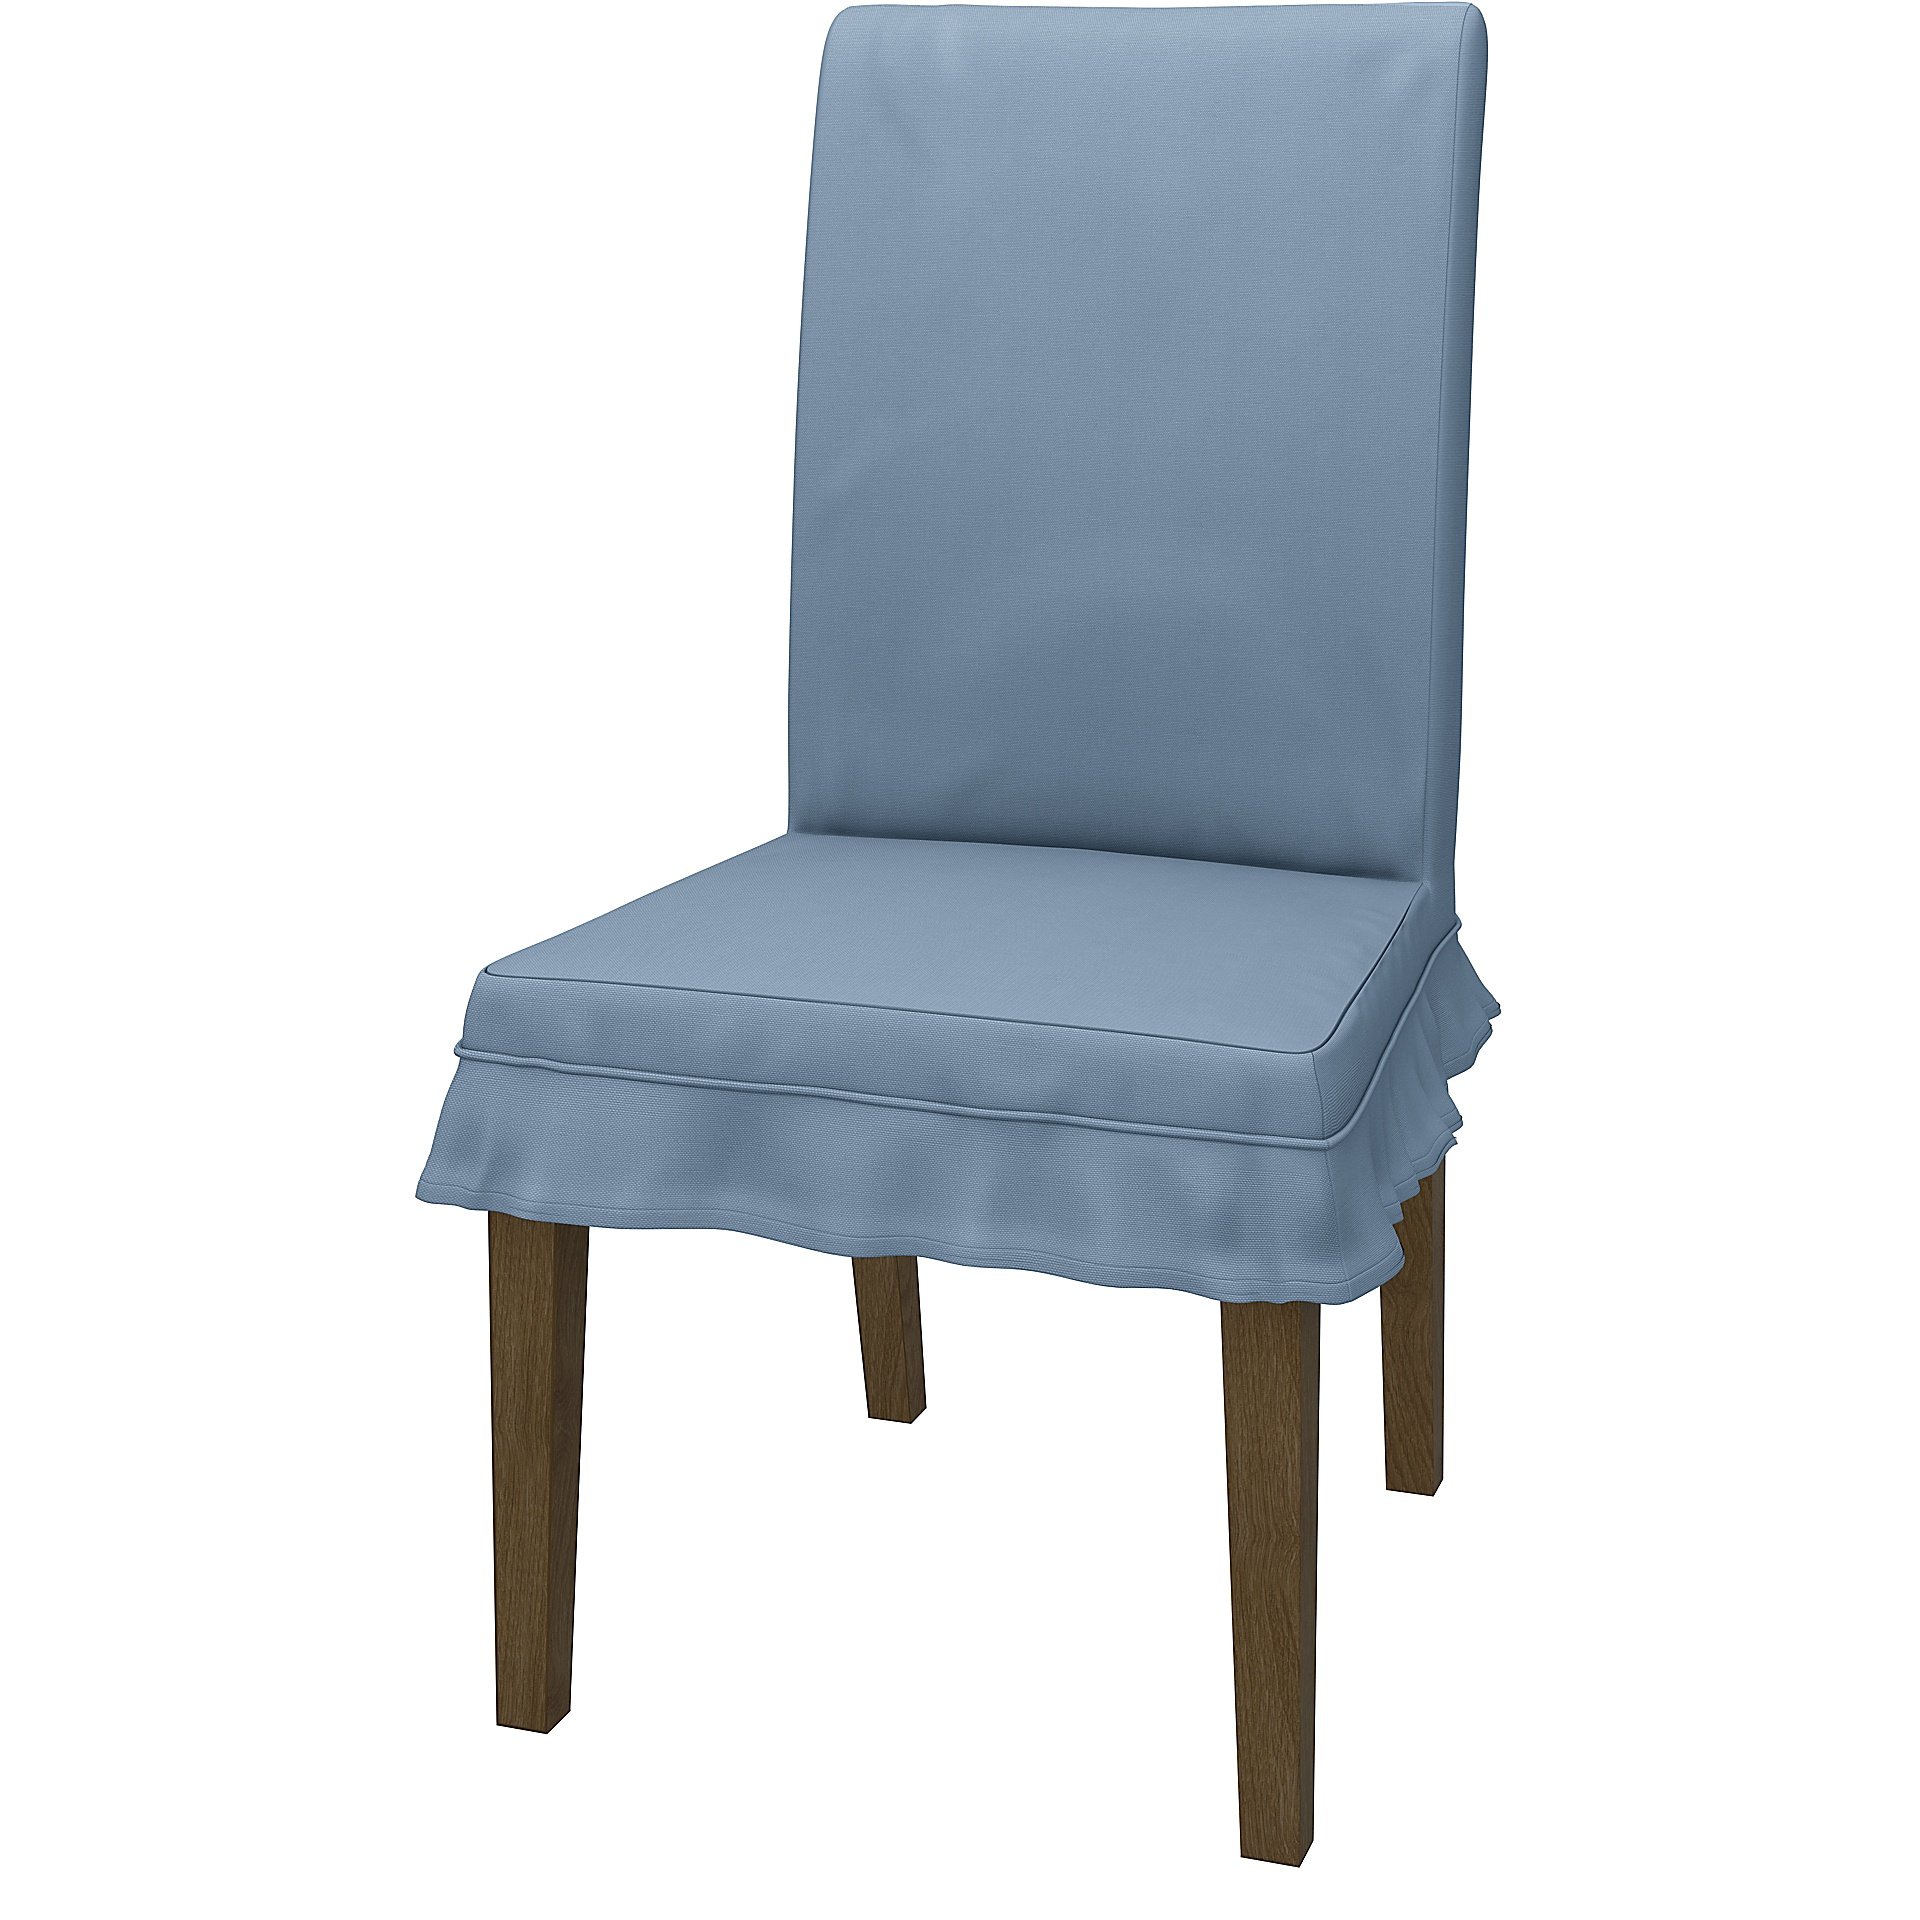 IKEA - HENRIKSDAL DINING CHAIR COVER SHORT SKIRT WITH RUFFLES (STANDARD MODEL), Dusty Blue, Cotton -